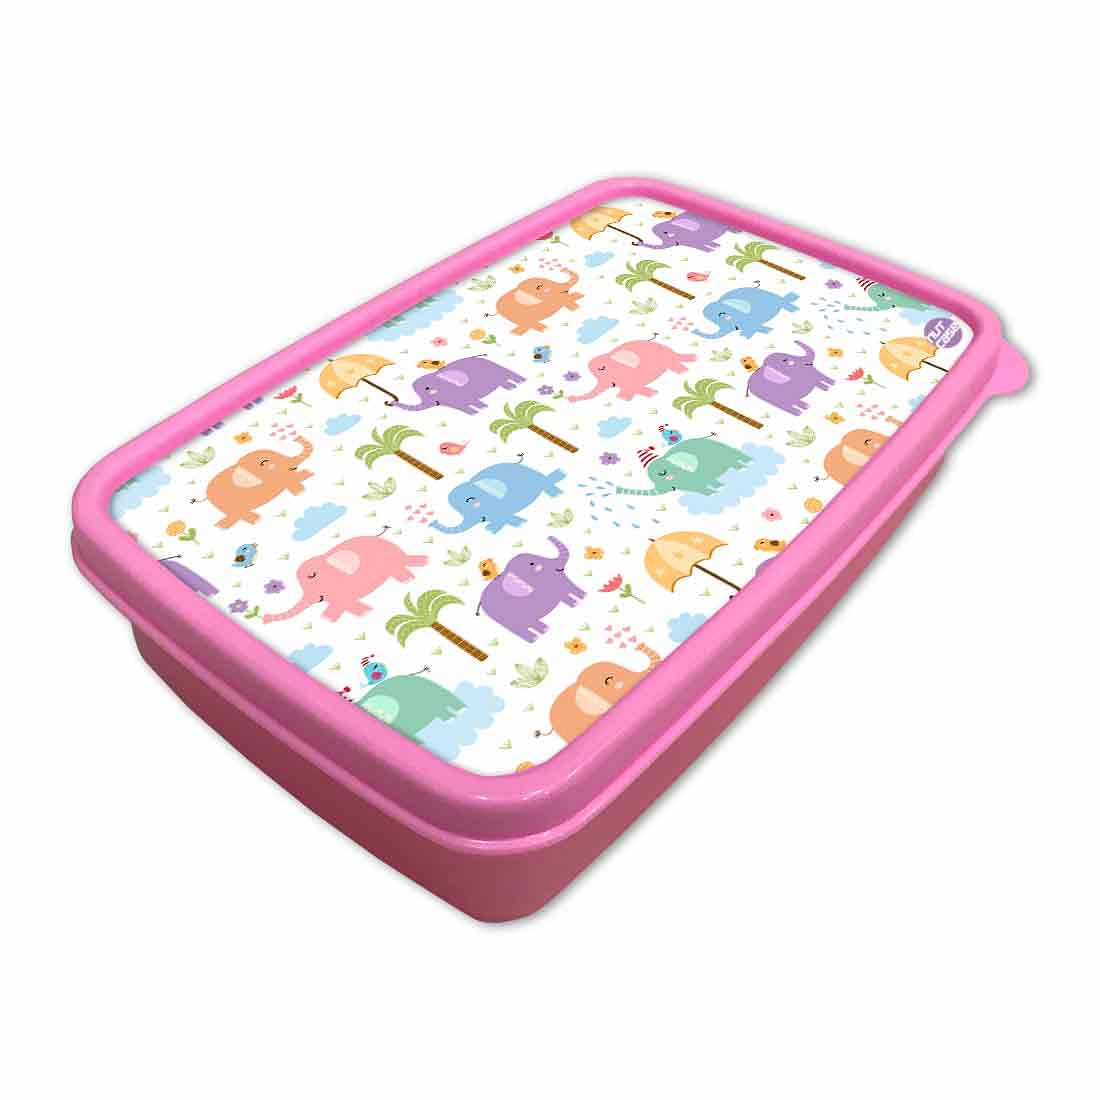 AYOG Return Gift For Kids Birthday Party Lunch Box